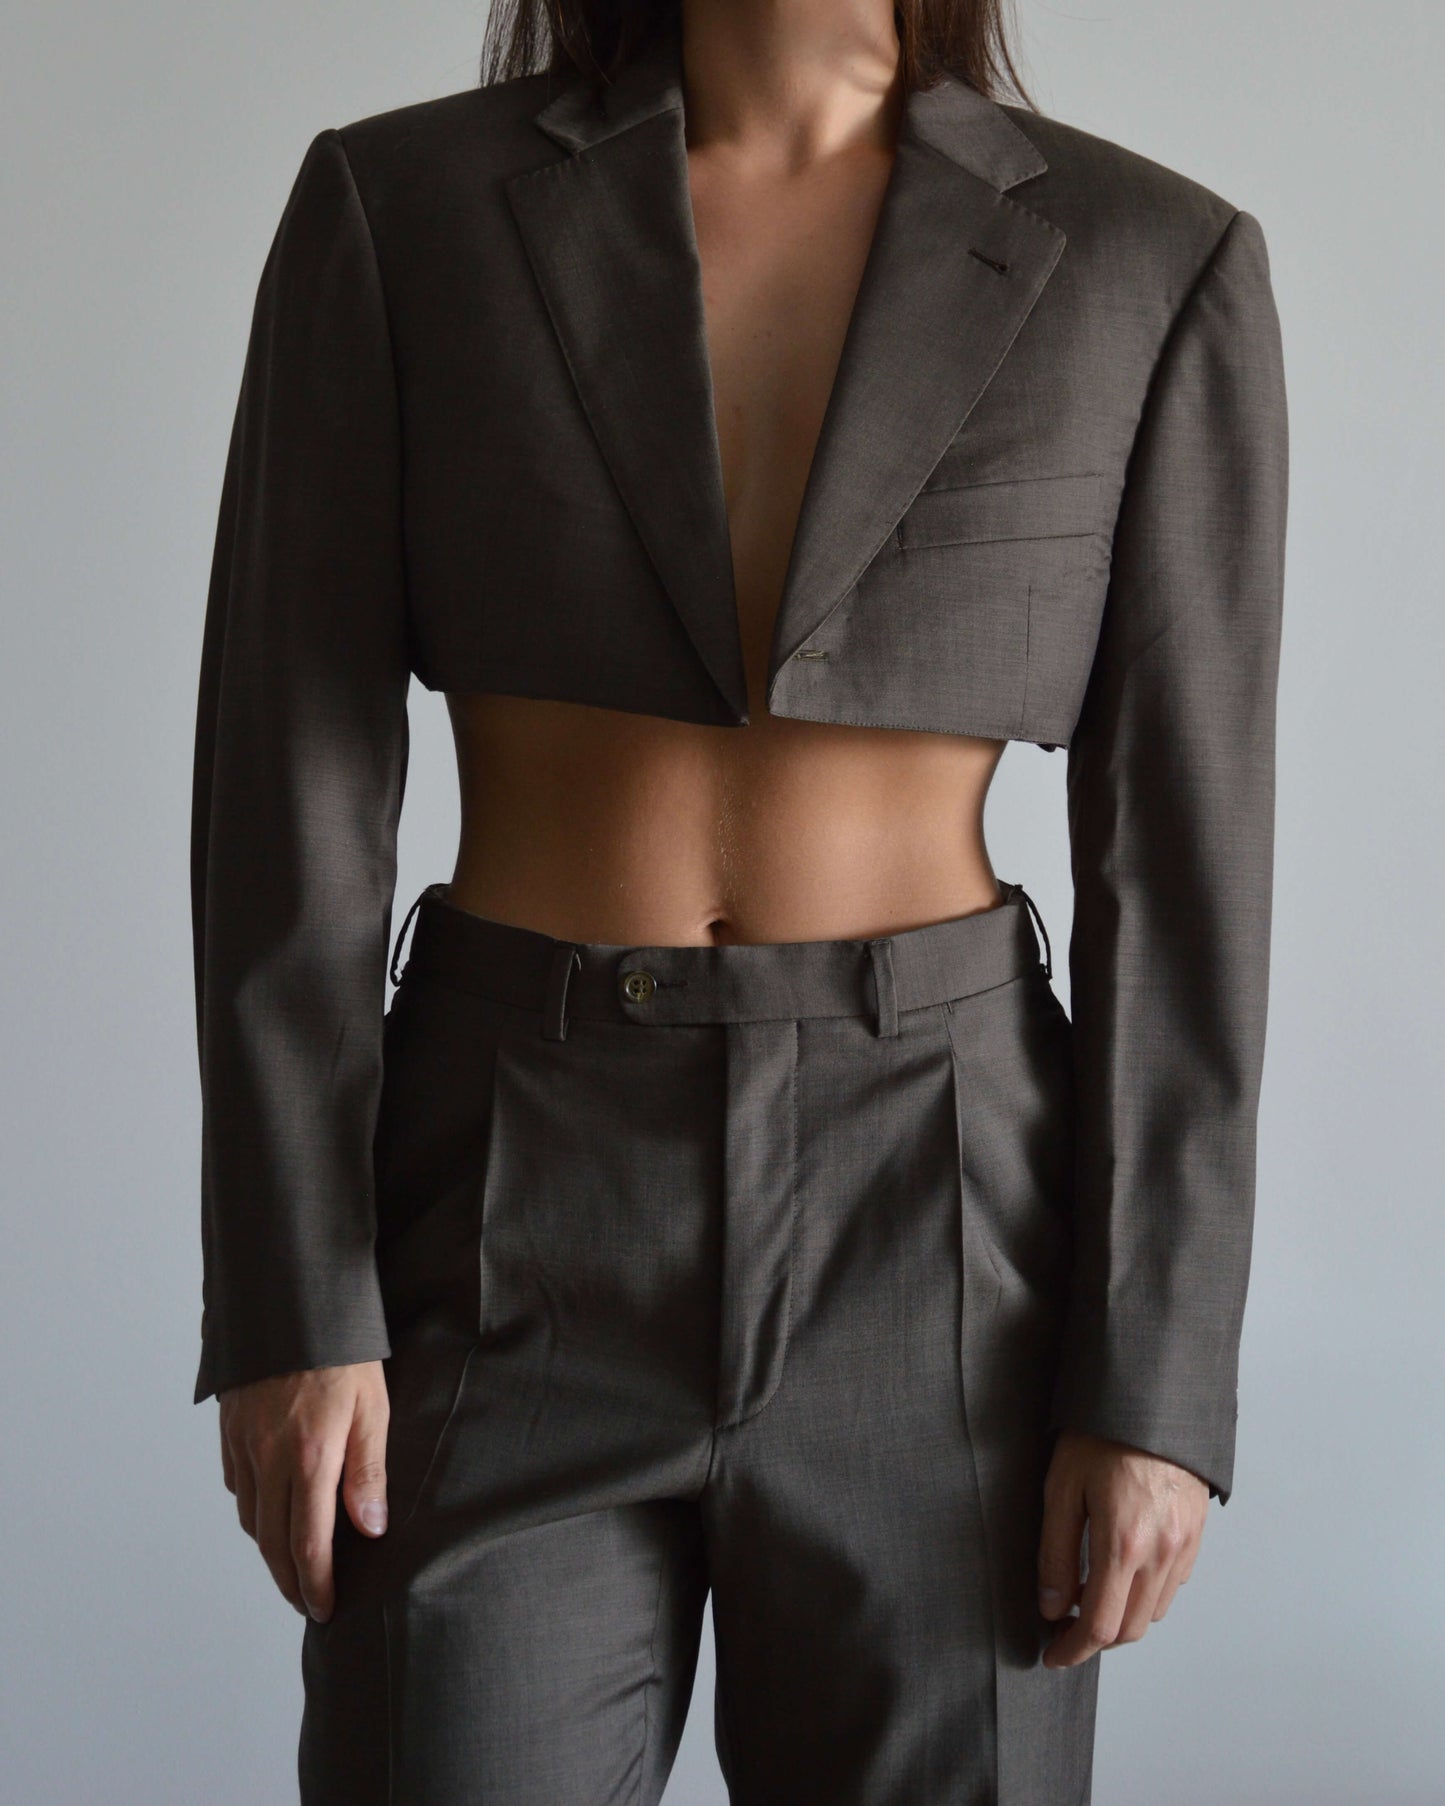 Suit - Chocolate Brown (S/M)